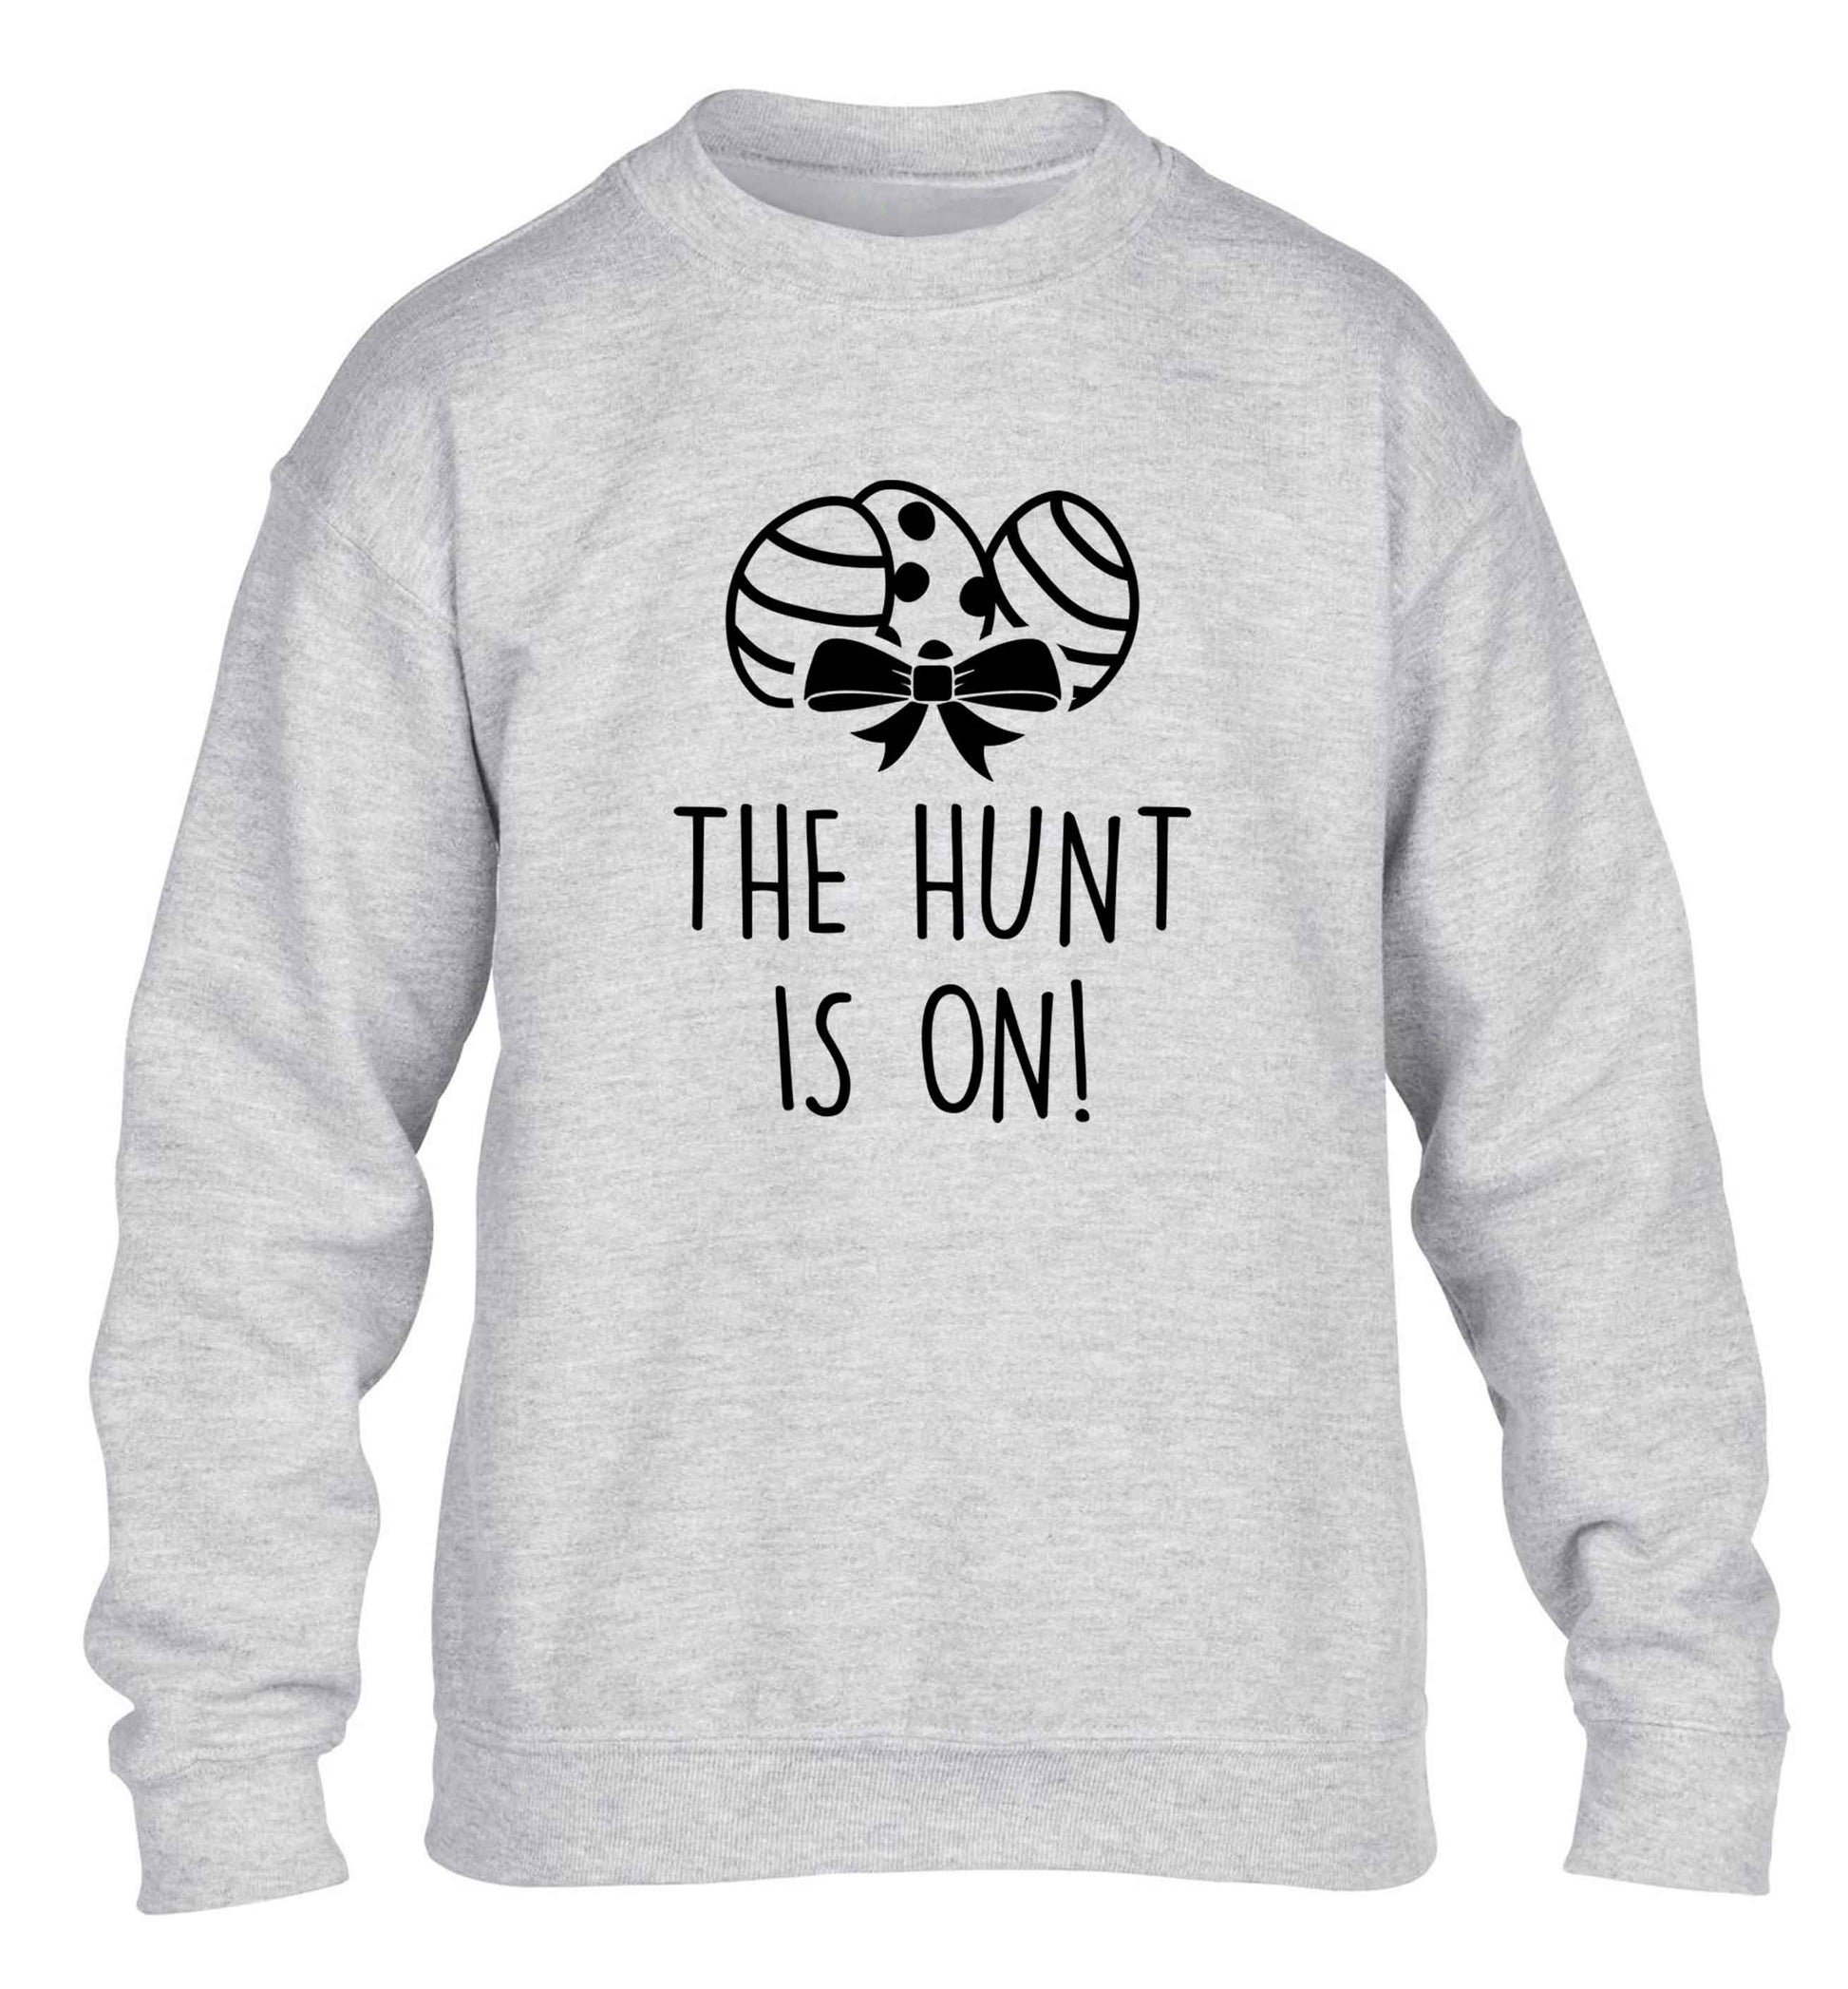 The hunt is on children's grey sweater 12-13 Years